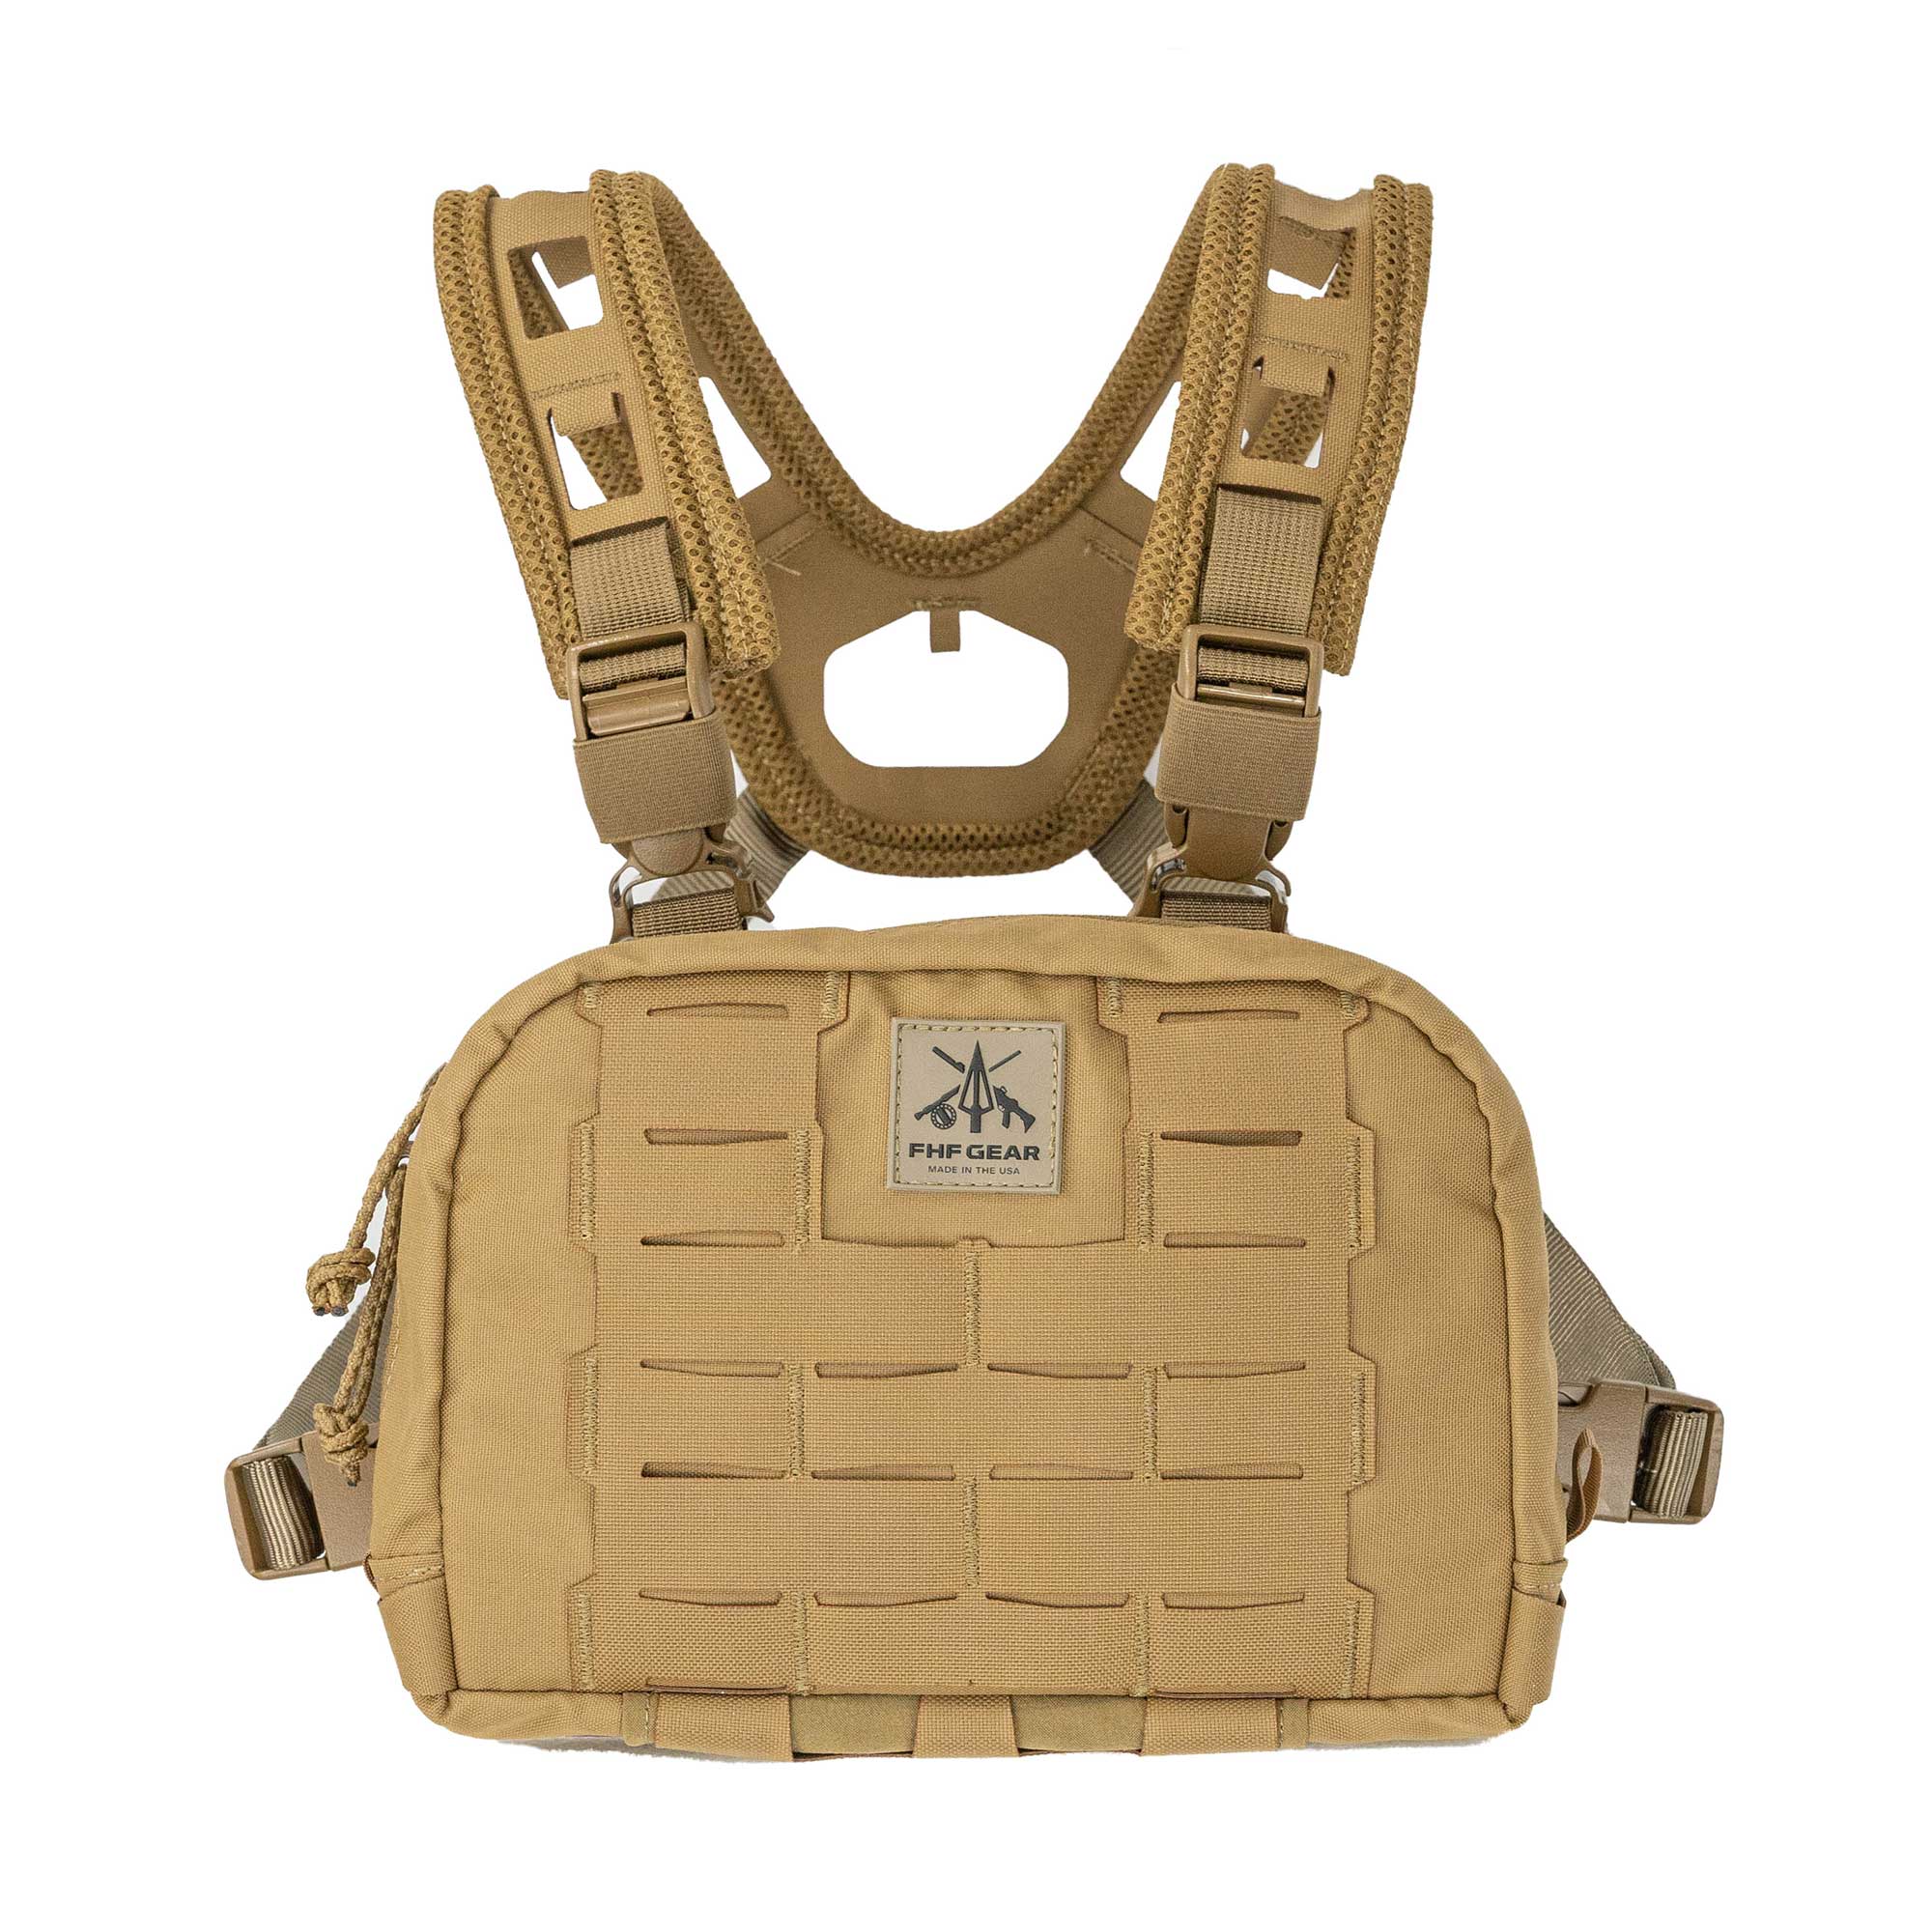 FHF Gear Fishing Kit in Coyote Brown | 500D Cordura